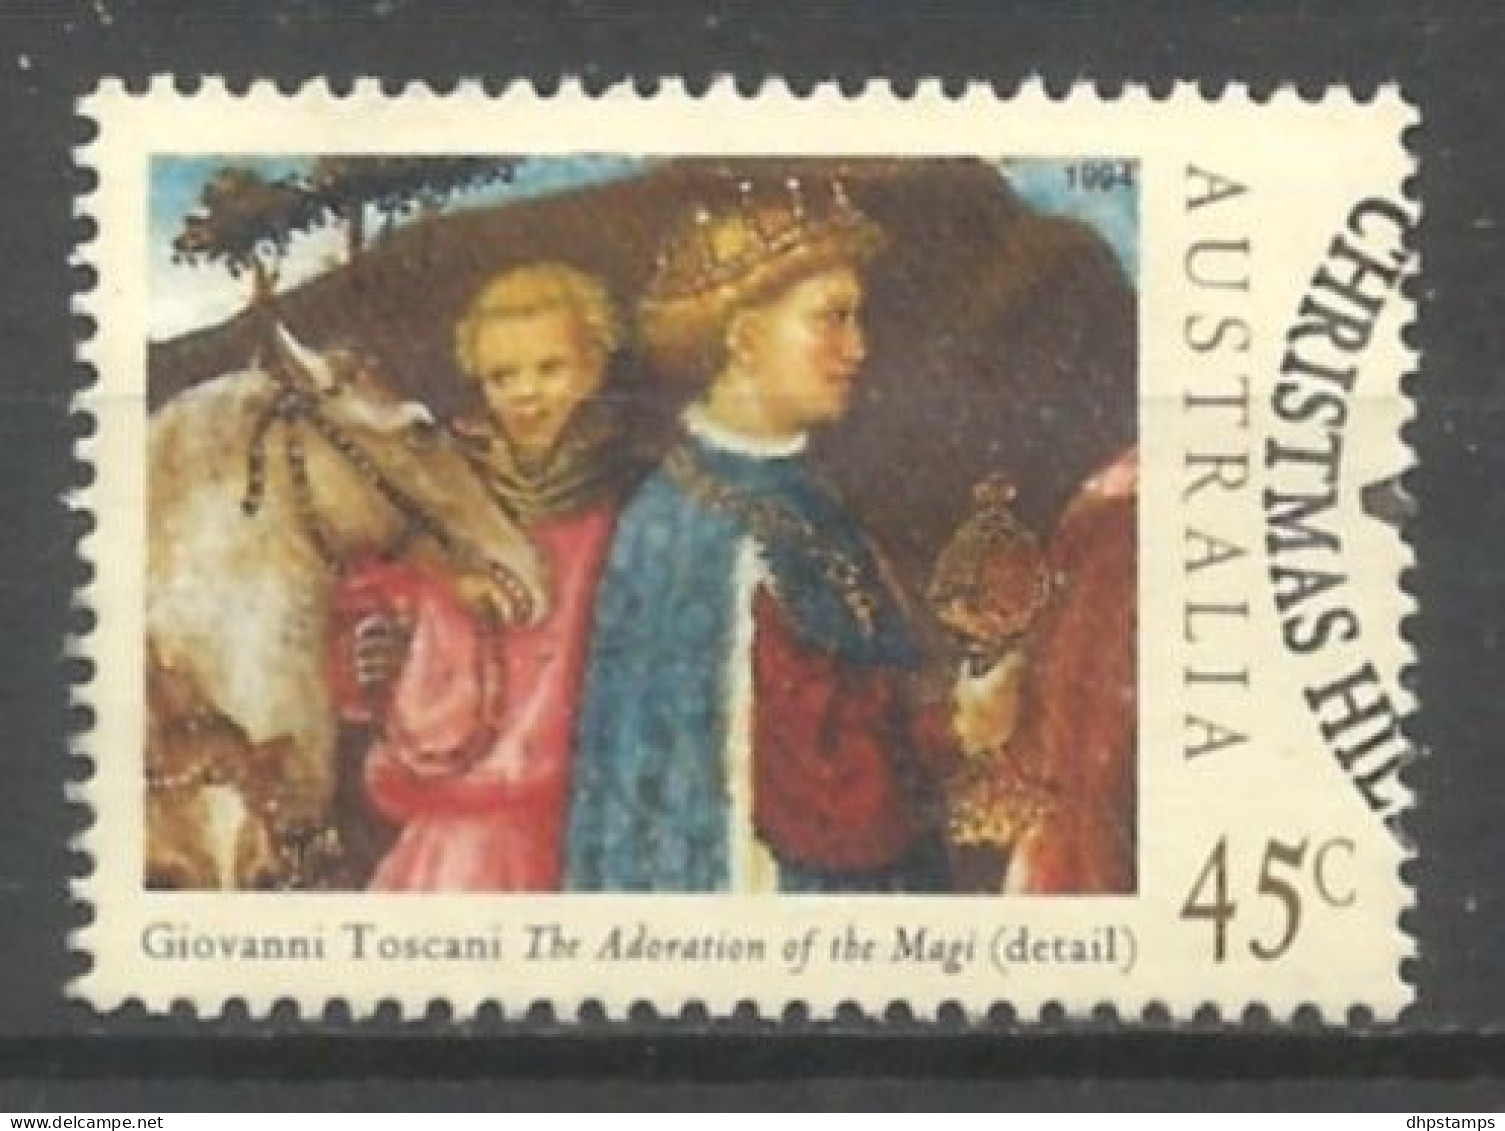 Australia 1994 Christmas Y.T. 1404 (0) - Used Stamps